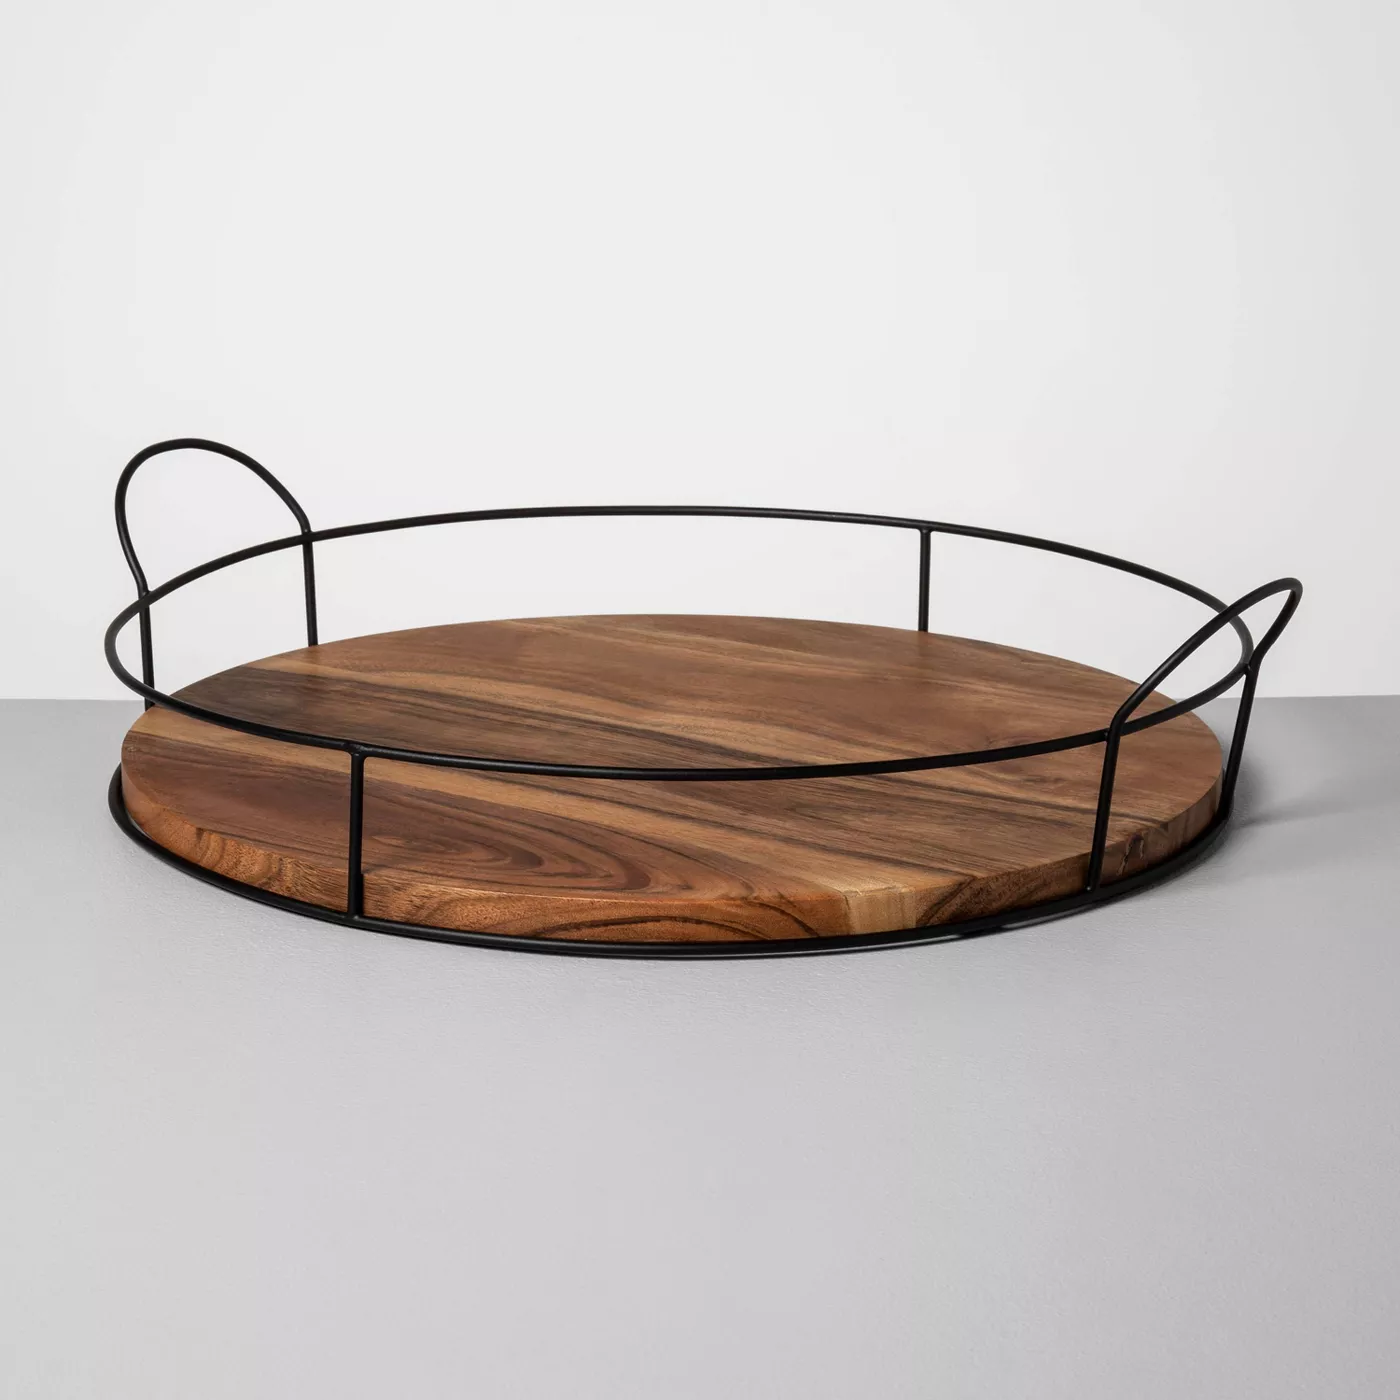 Wood and Metal Tray - Hearth & Hand™ with Magnolia - image 1 of 10